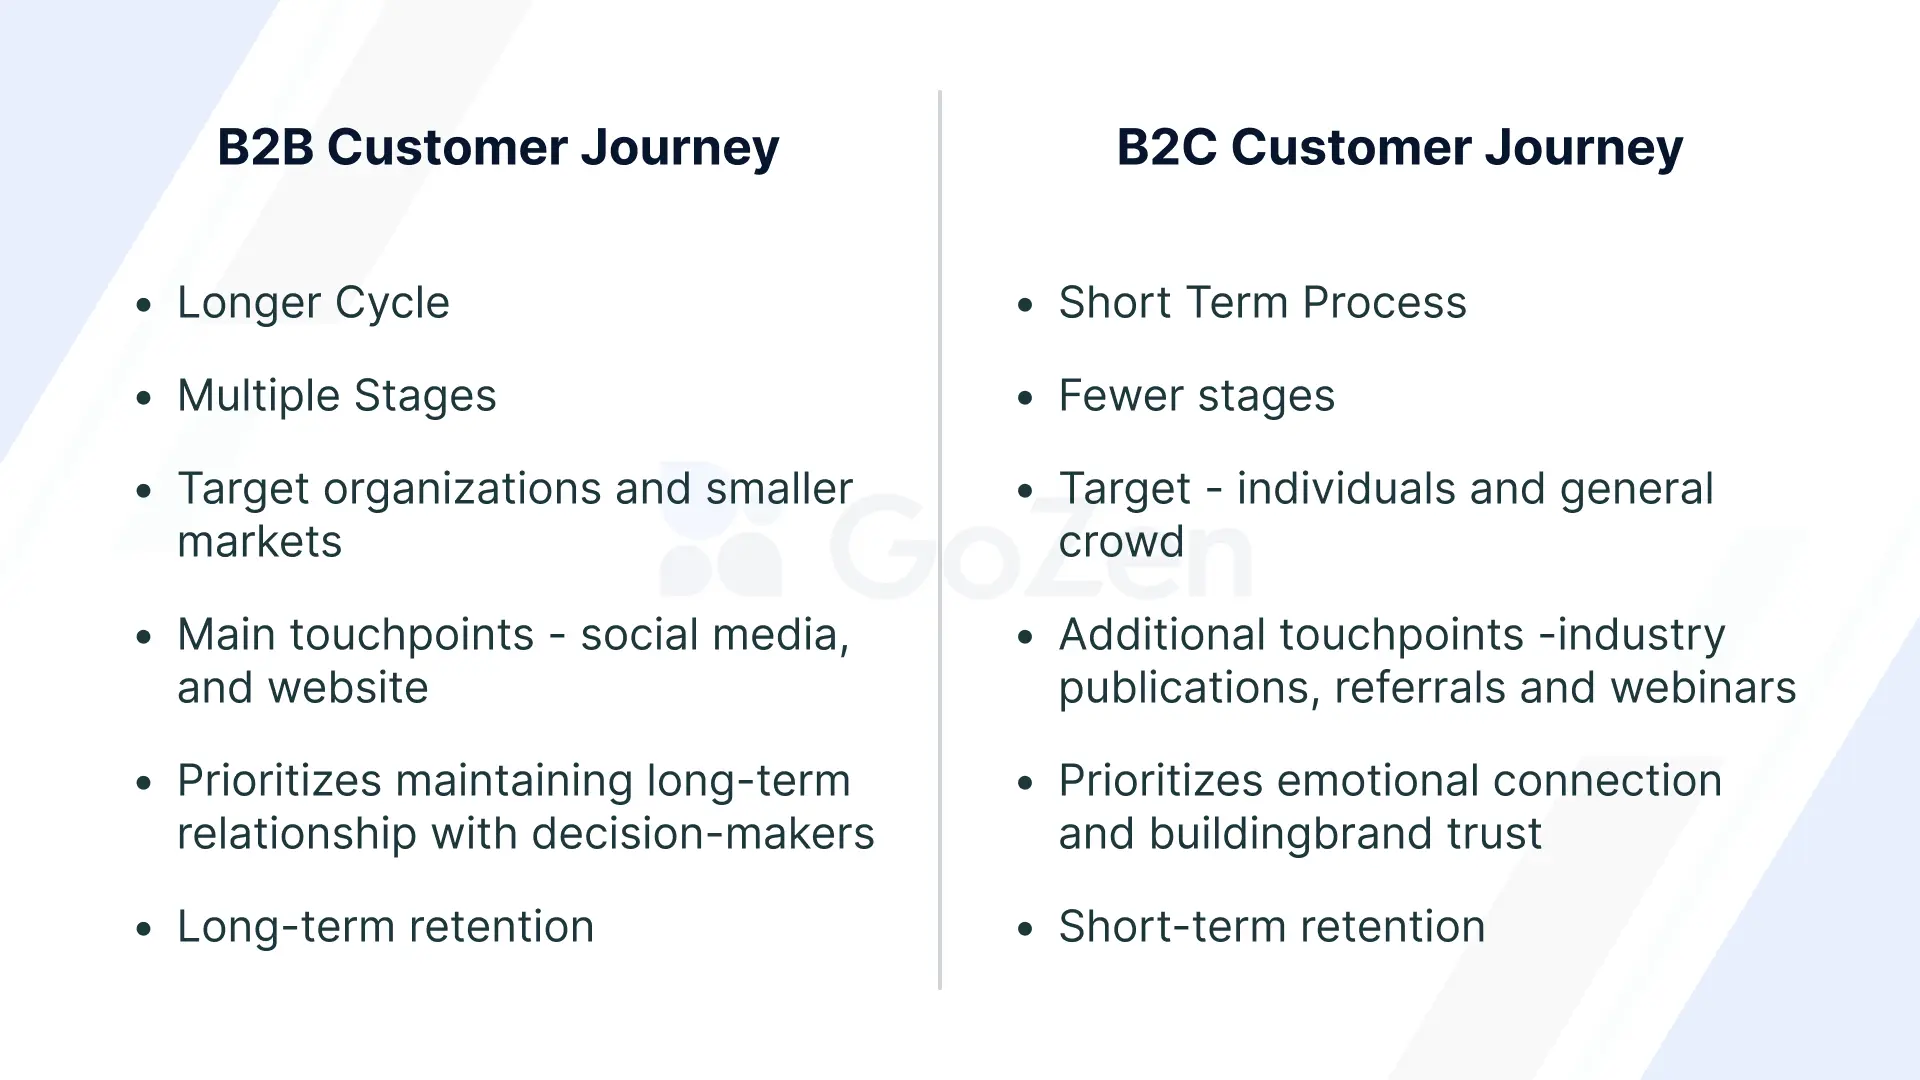 B2B and B2C Customer Journey Differences 